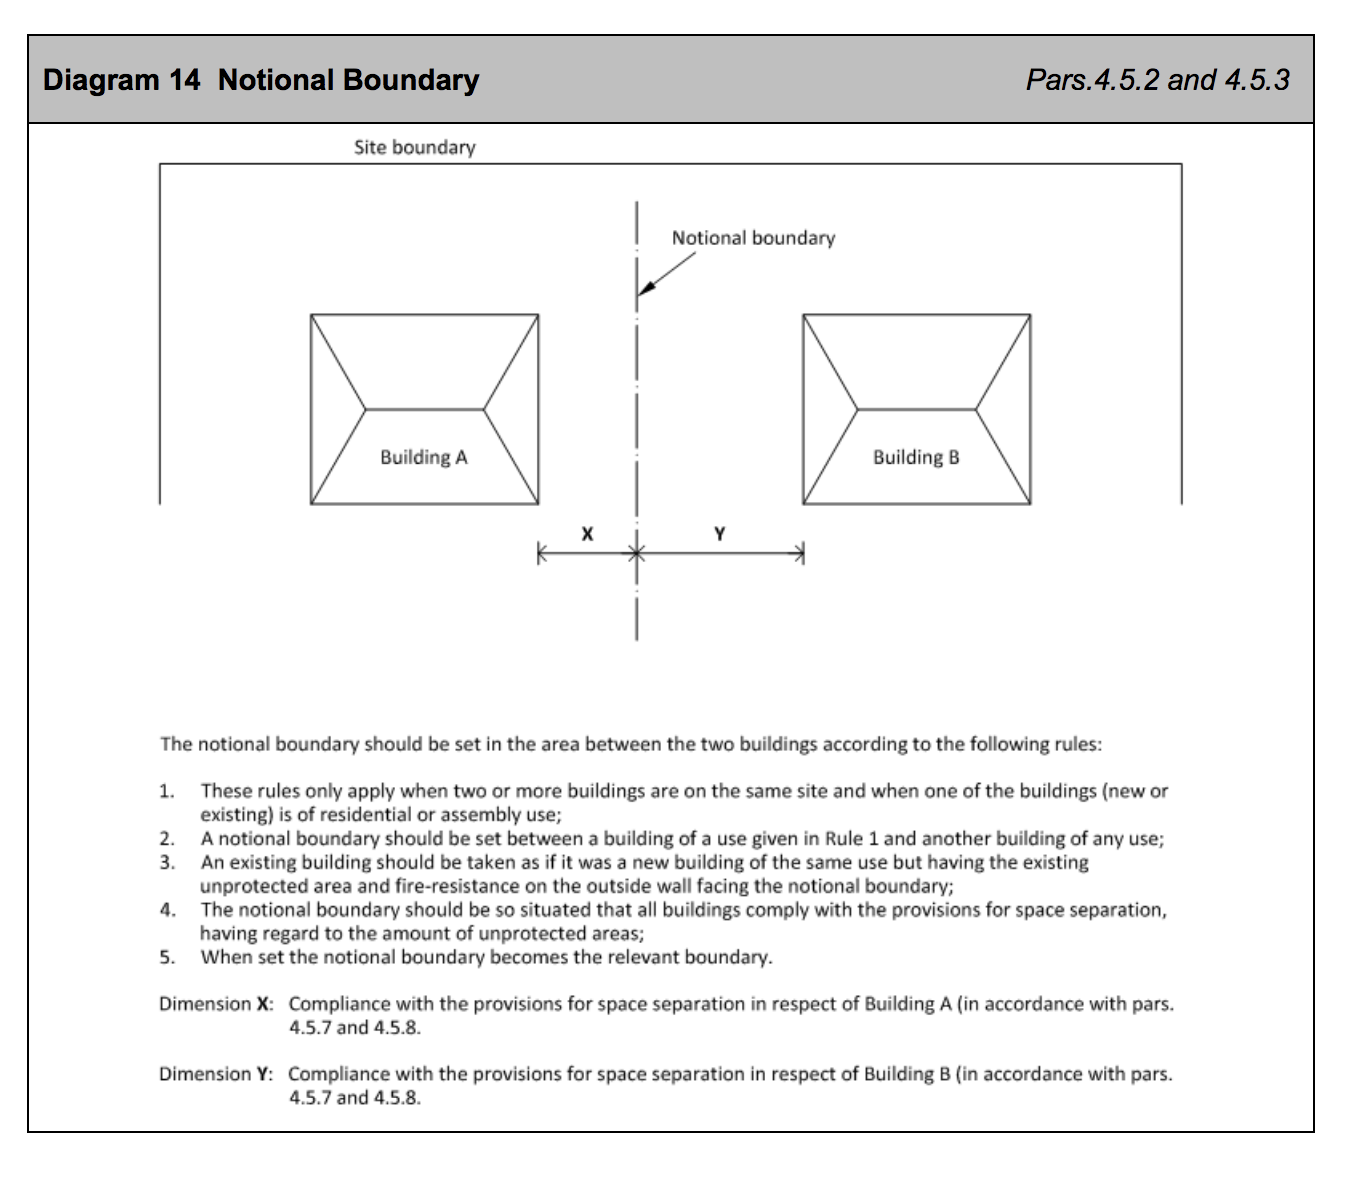 Diagram HB14 - Notional boundary - Extract from TGD B Vol. 2